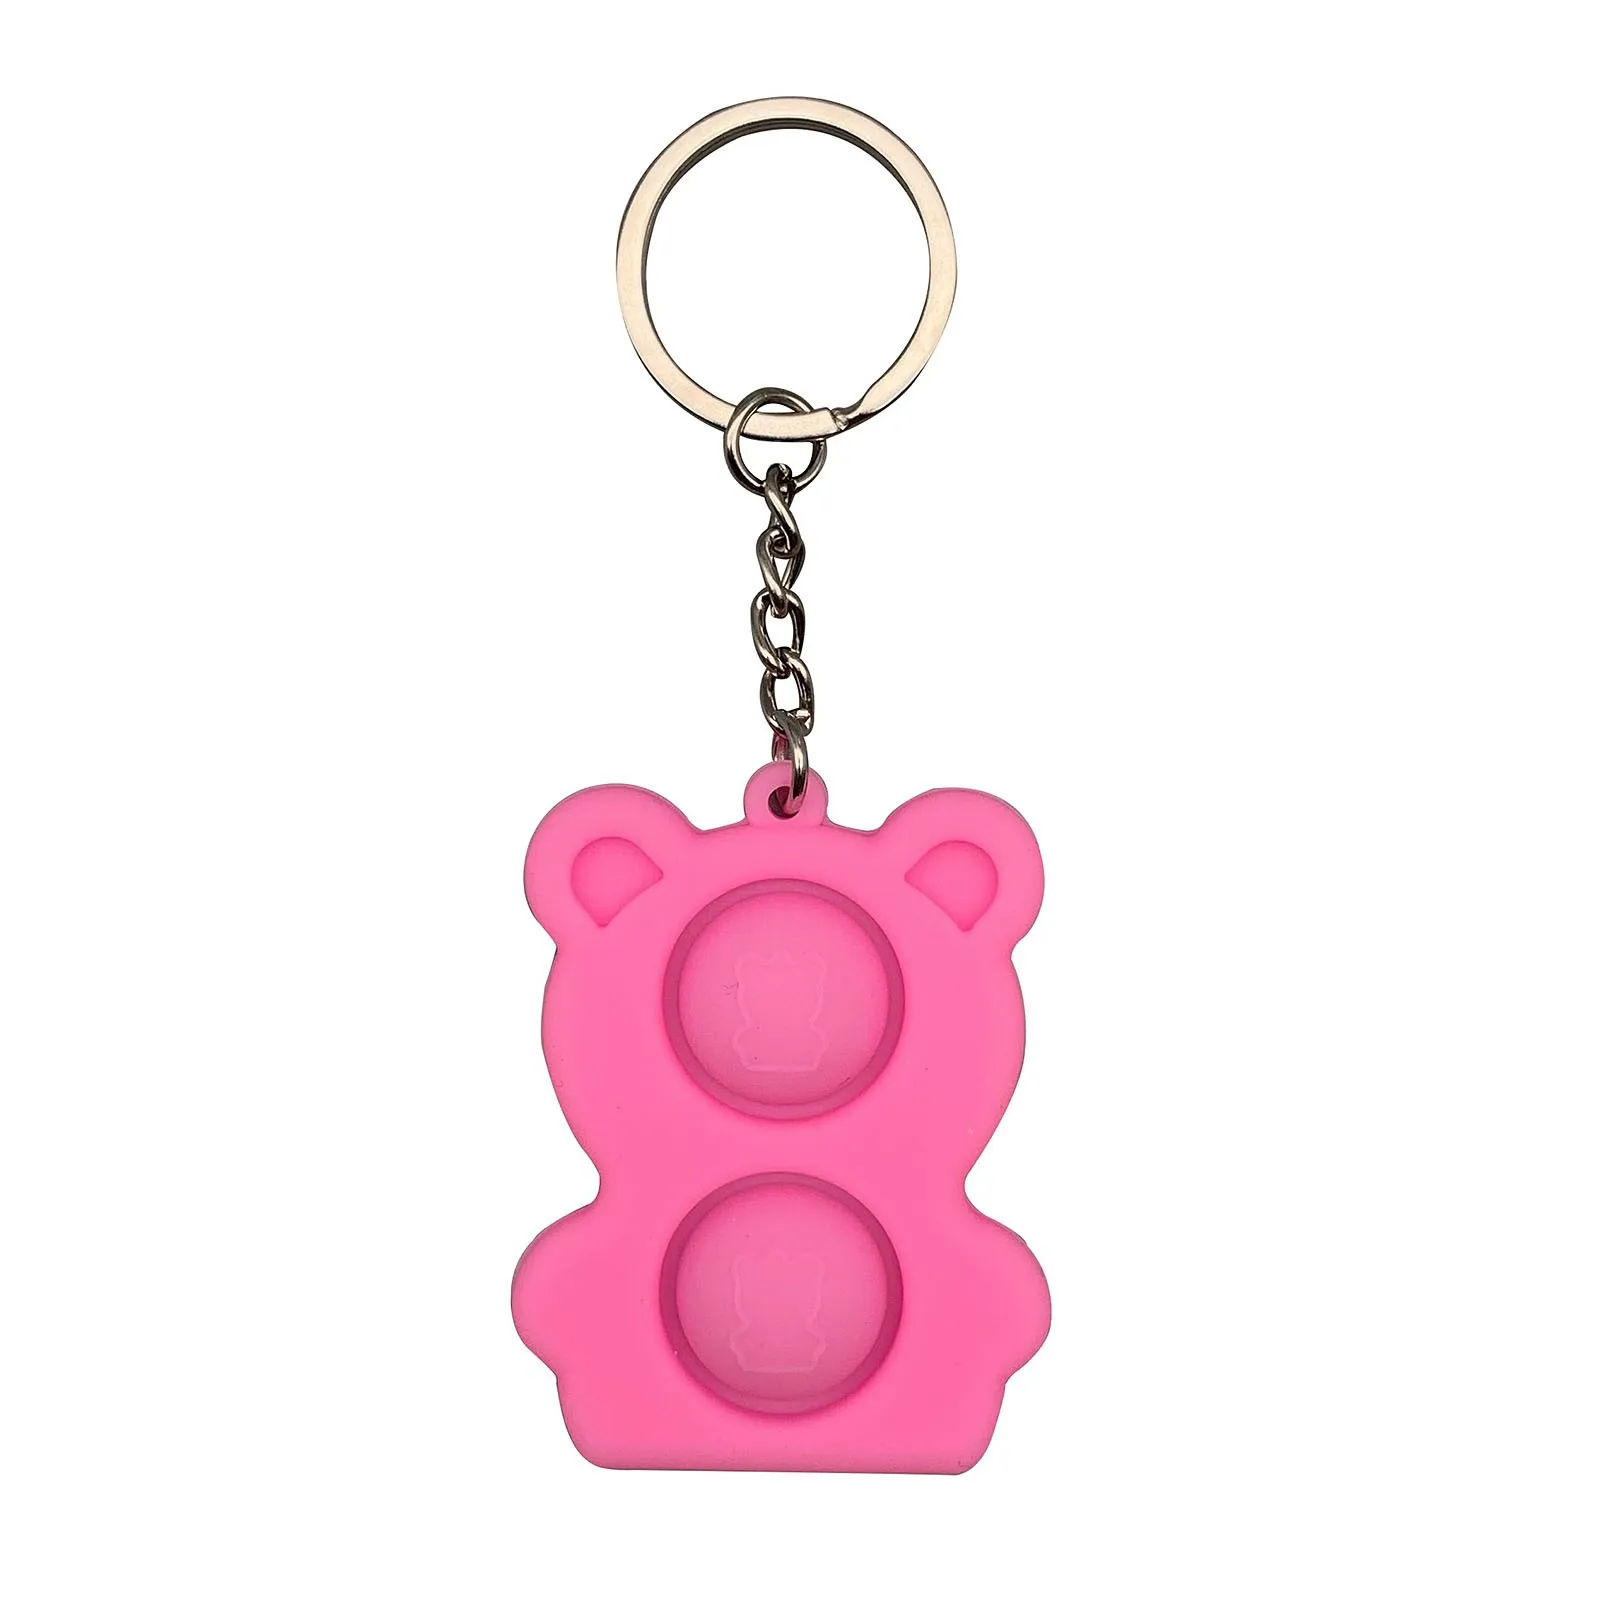 Pops It Vierkant Mini Popit Bear Keychain Push Bubble Silicone Sensory Toys Are Suitable For Relieving Stress Children Montessor